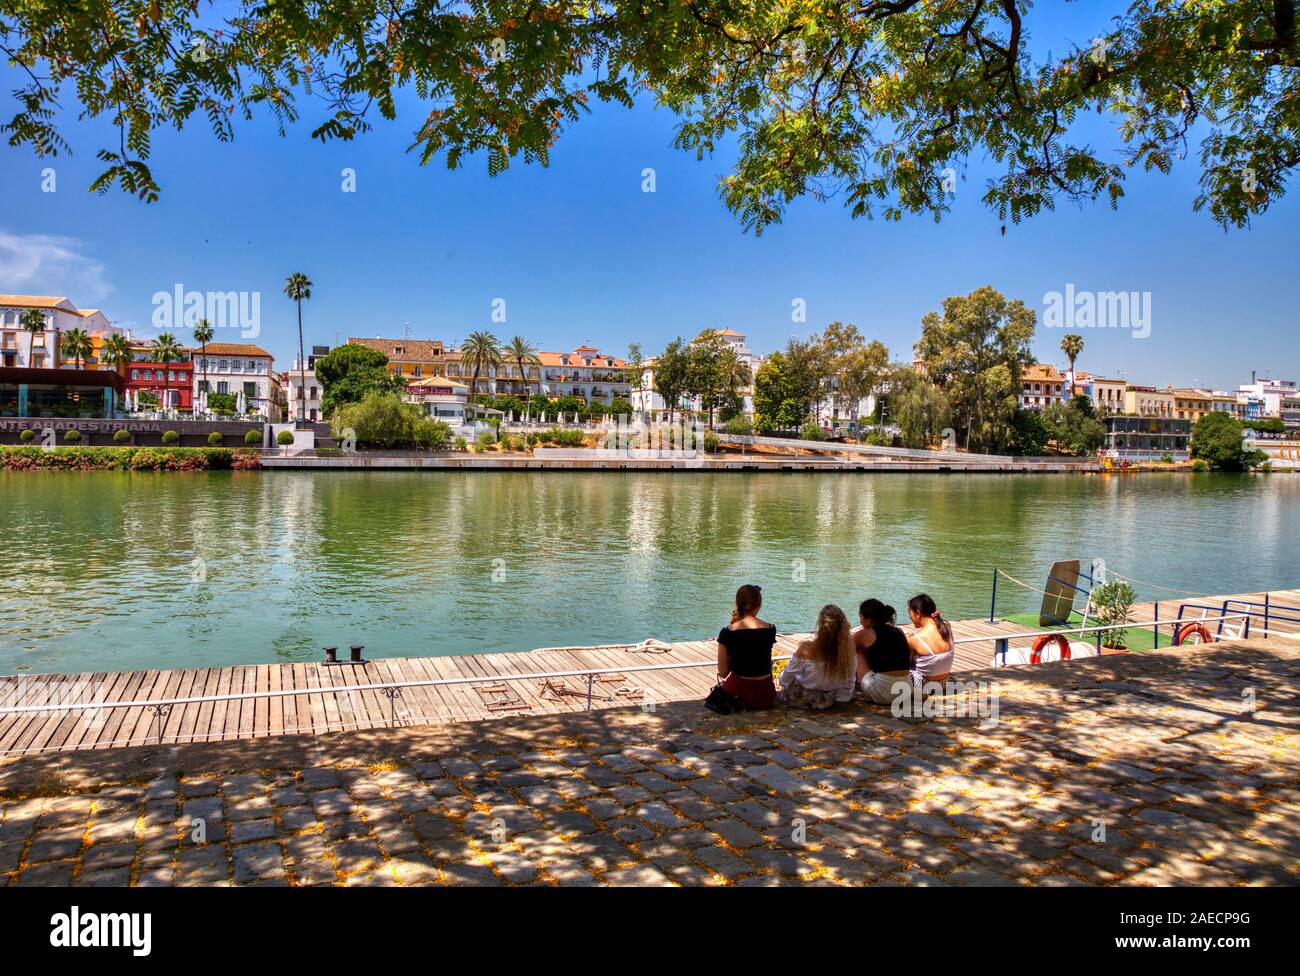 Triana Barrio across  Guadalquivir river in Seville, Andalusia, Spain Stock Photo